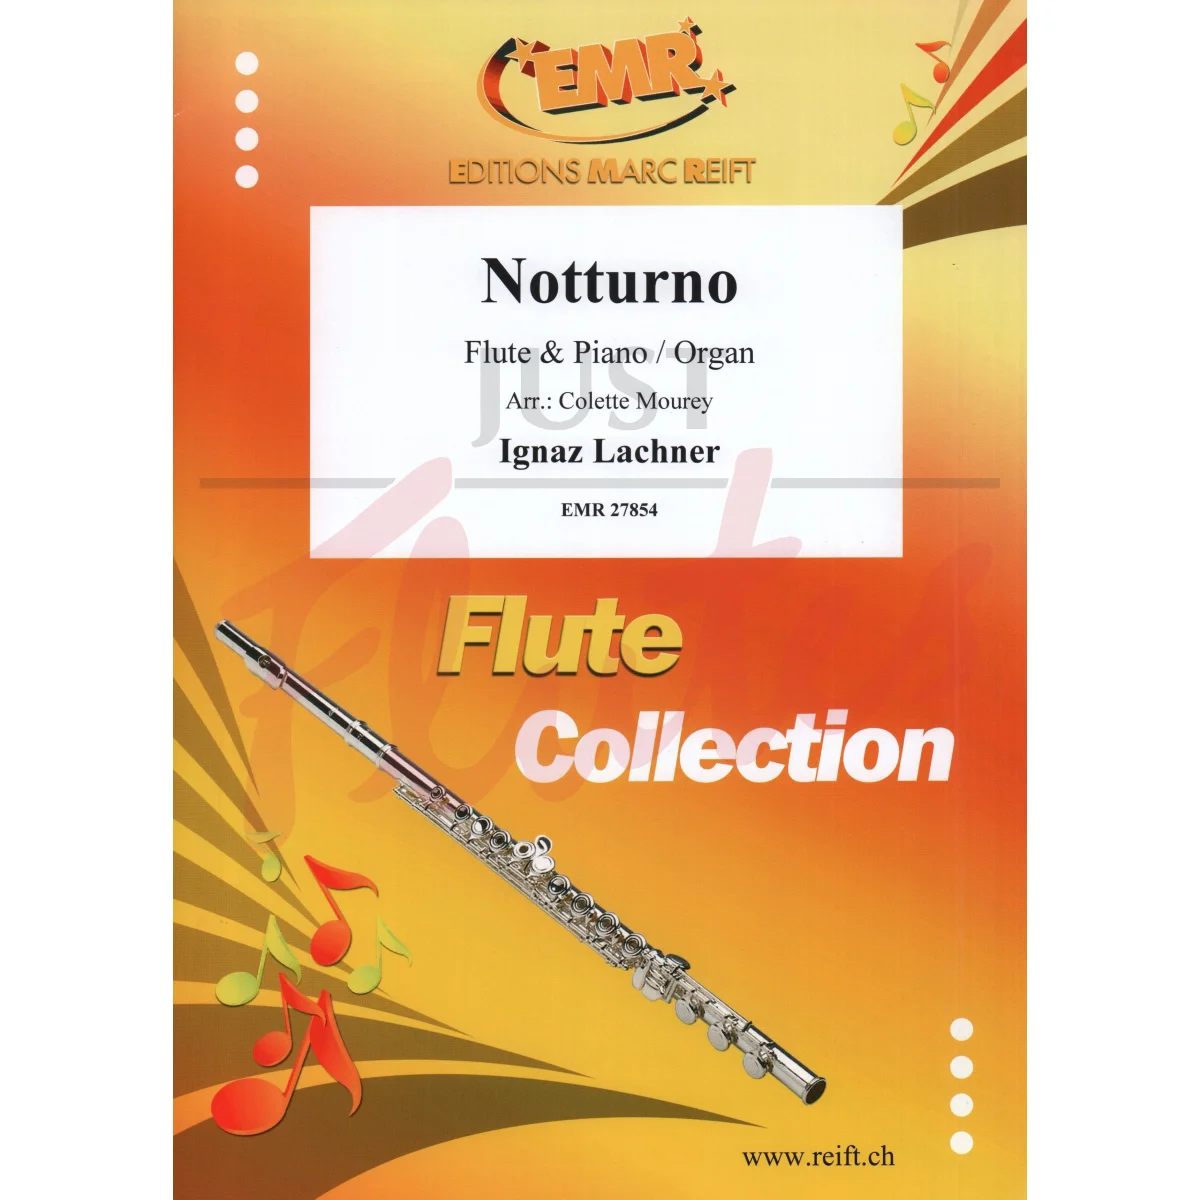 Notturno for Flute and Piano/Organ